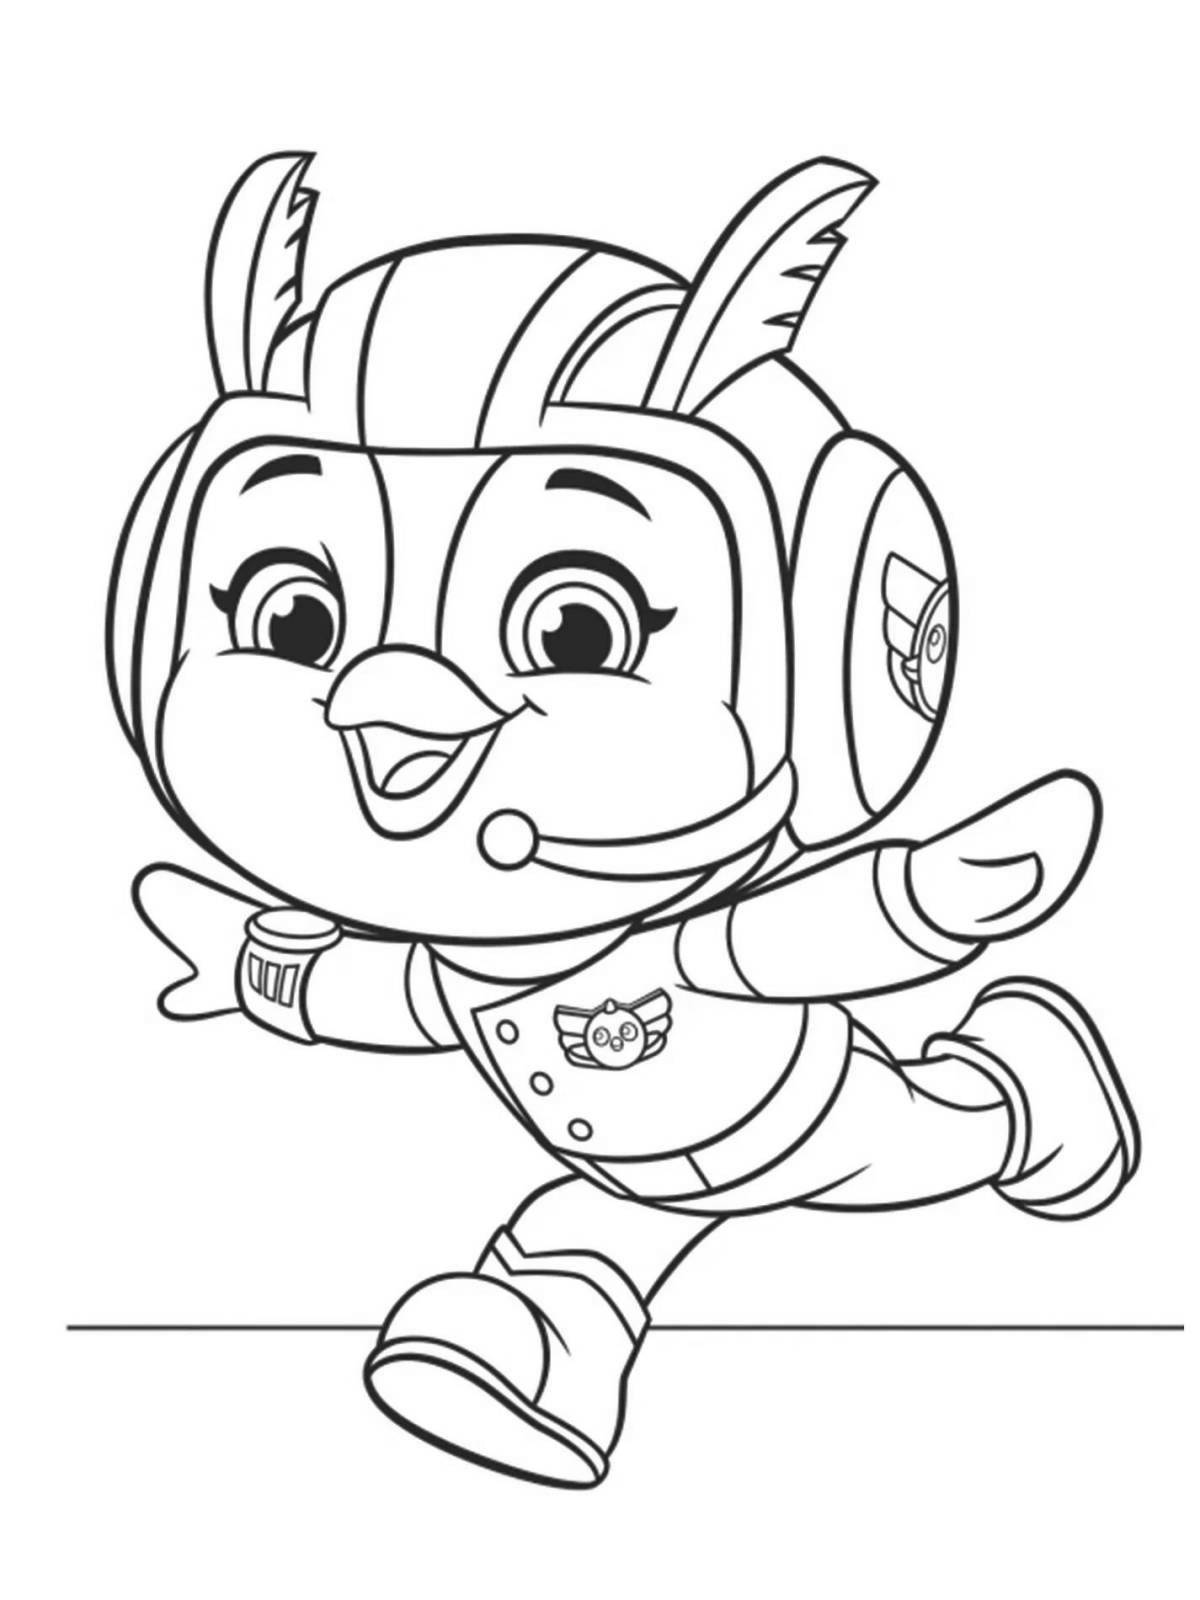 Charming coloring page top